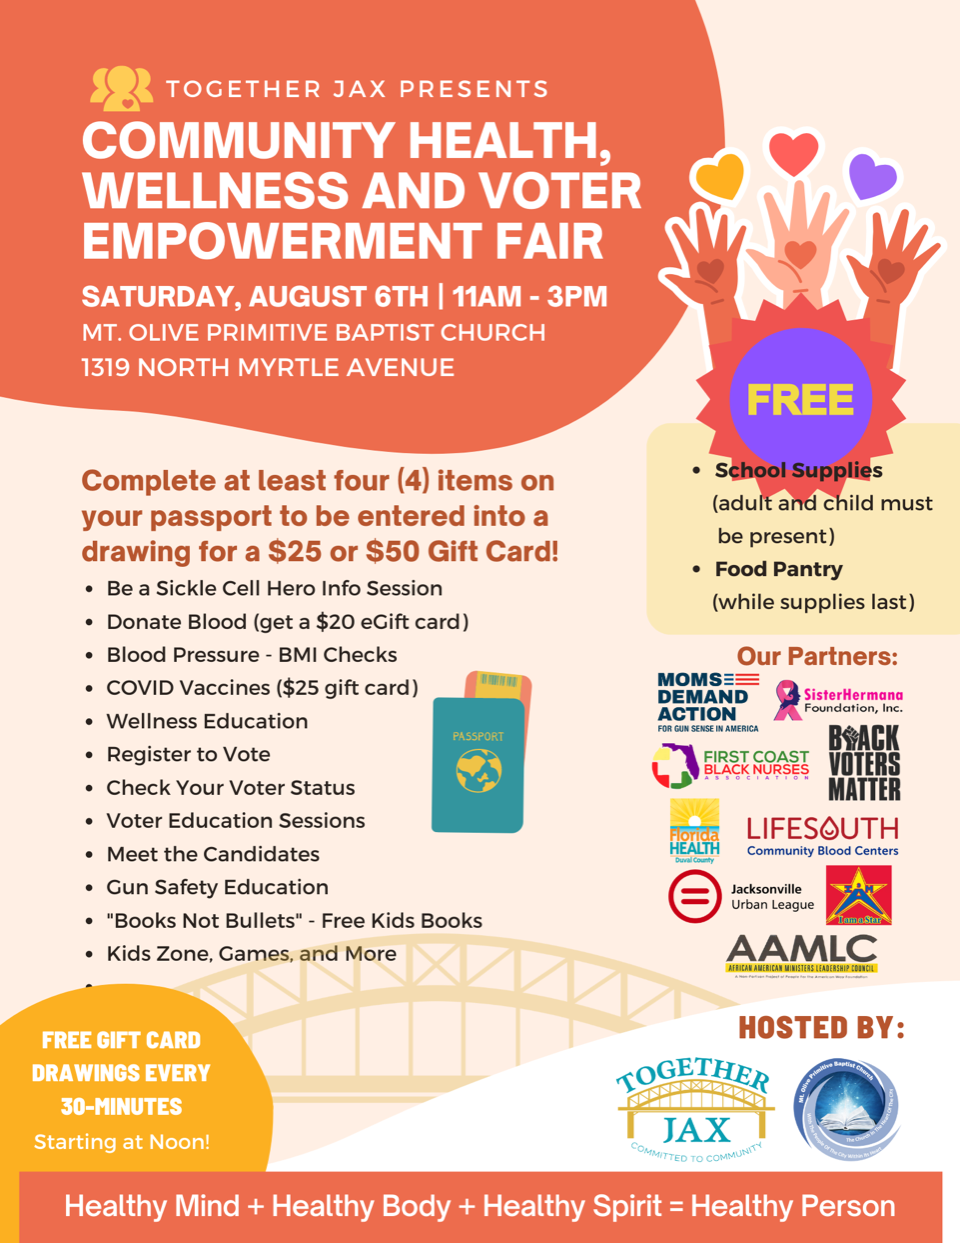 Together Jax presents a Community Health, Wellness, and Voter Empowerment Fair - August 6, 2022